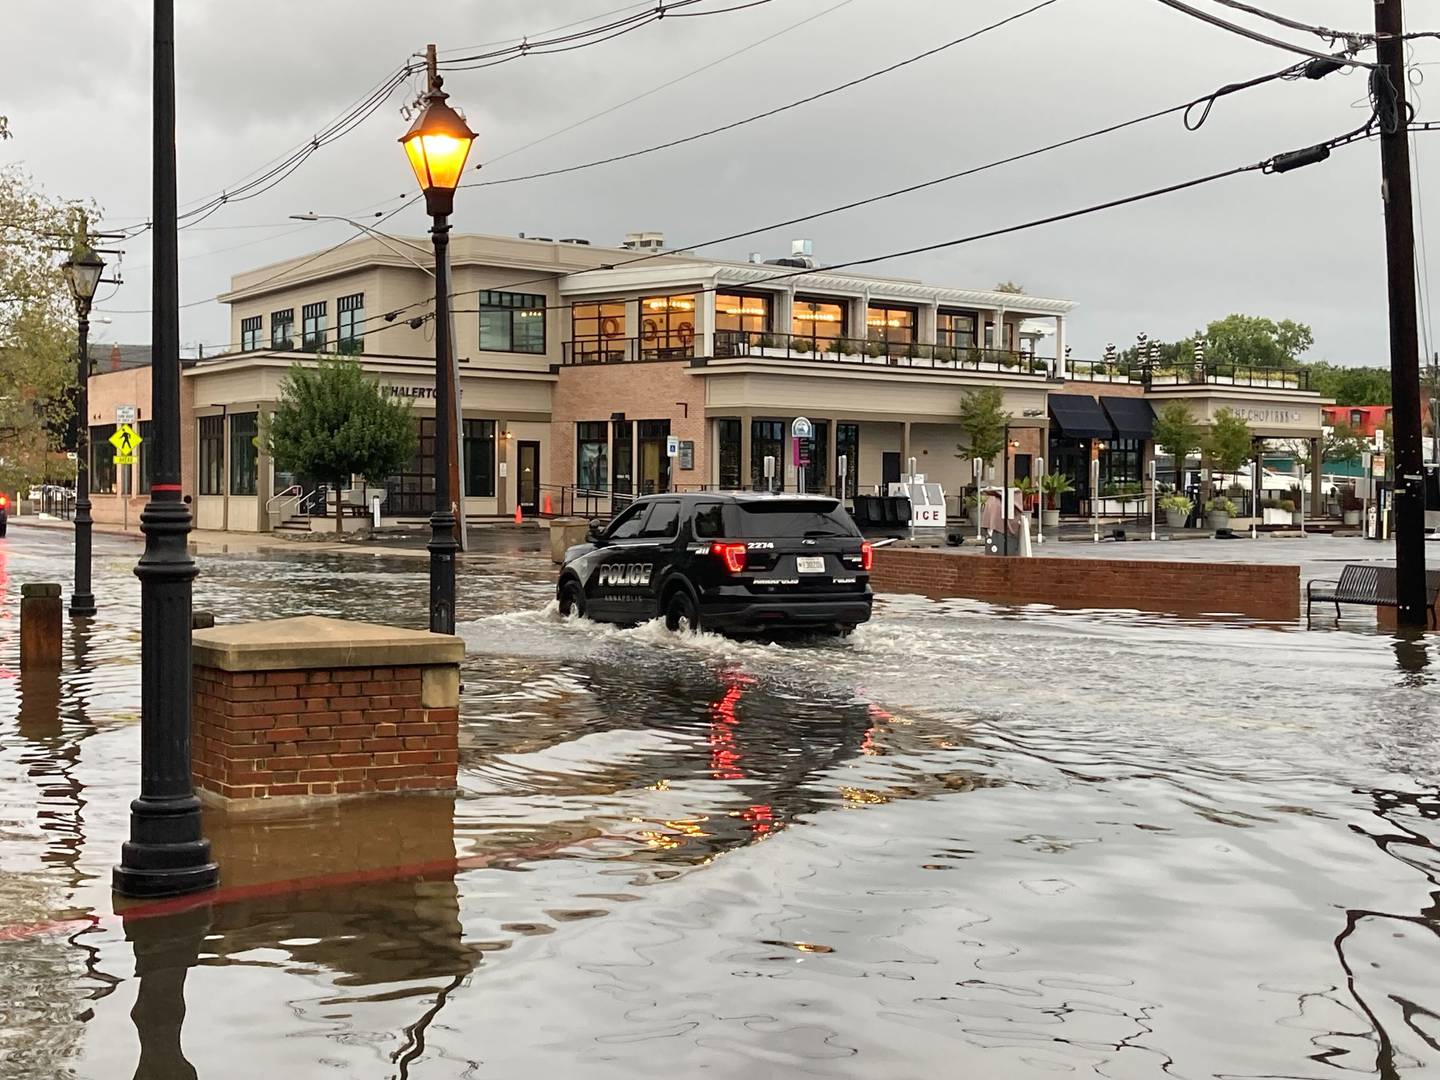 Flooding in downtown Annapolis Sunday morning as a result of the remains of the storm that was once known as Tropical Storm Ophelia. An Annapolis Police vehicle rides through floodwaters on Compromise Street.